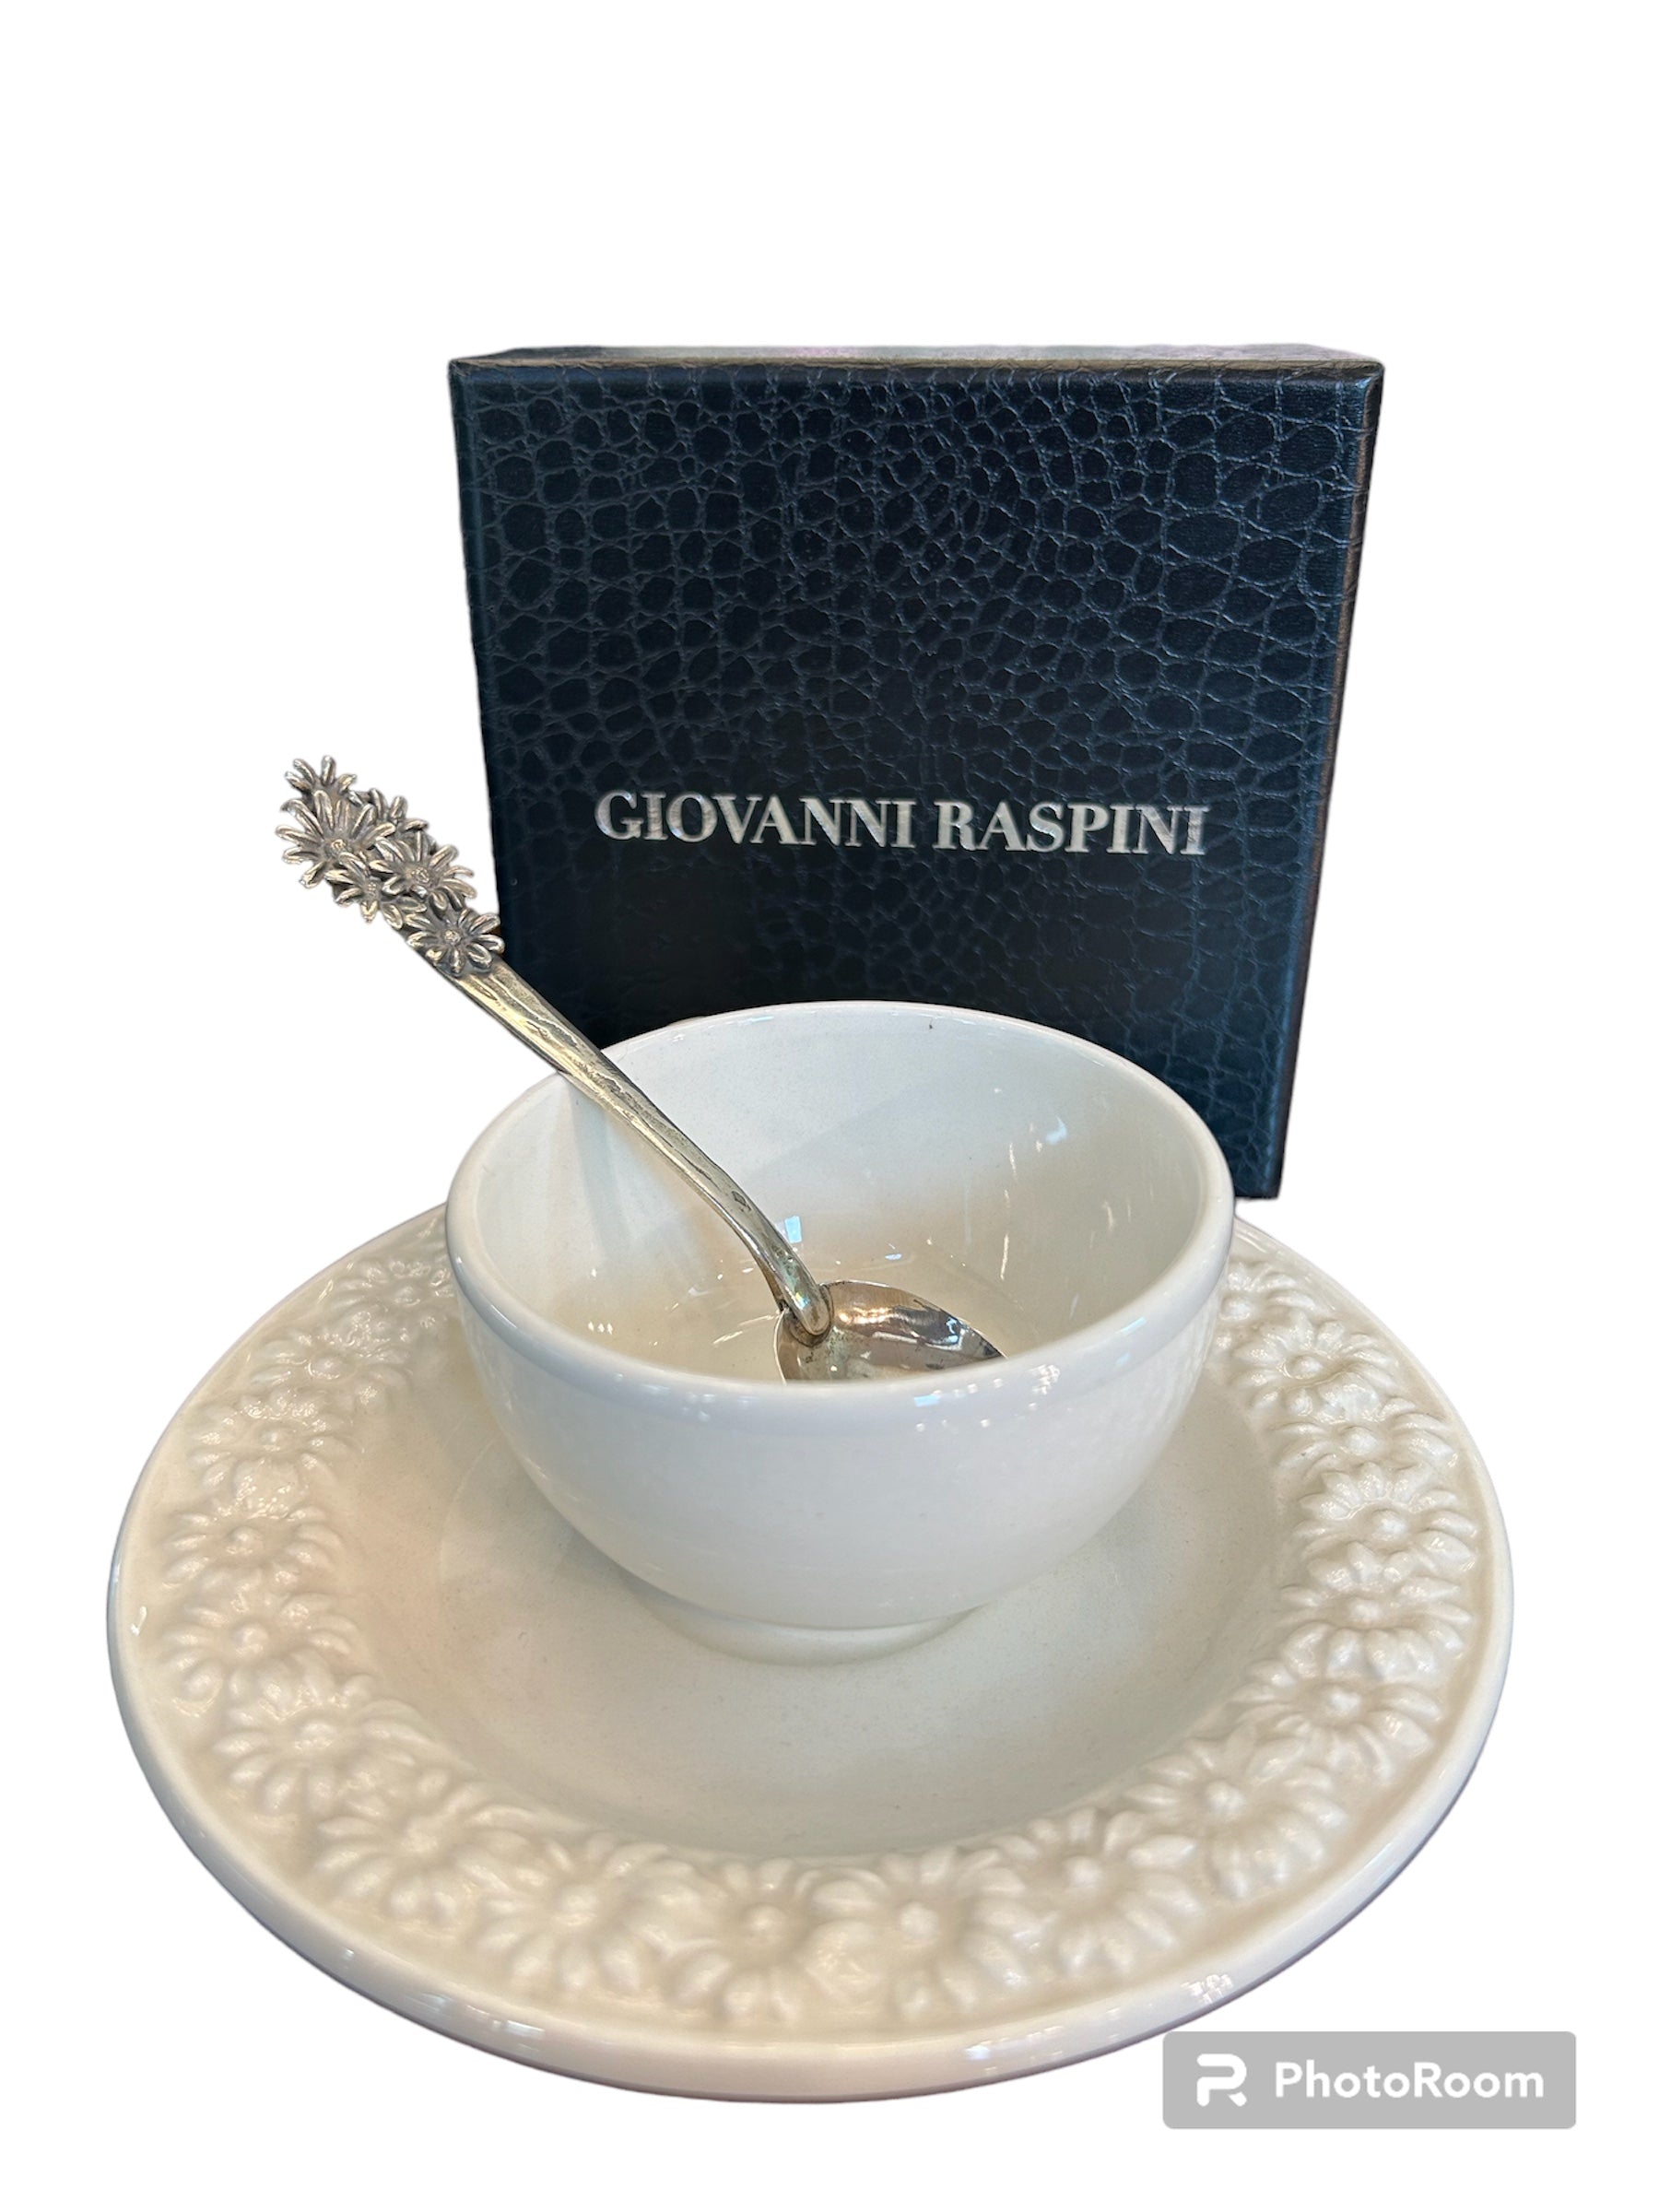 Giovanni Raspini - Pair of porcelain and silver coffee cups